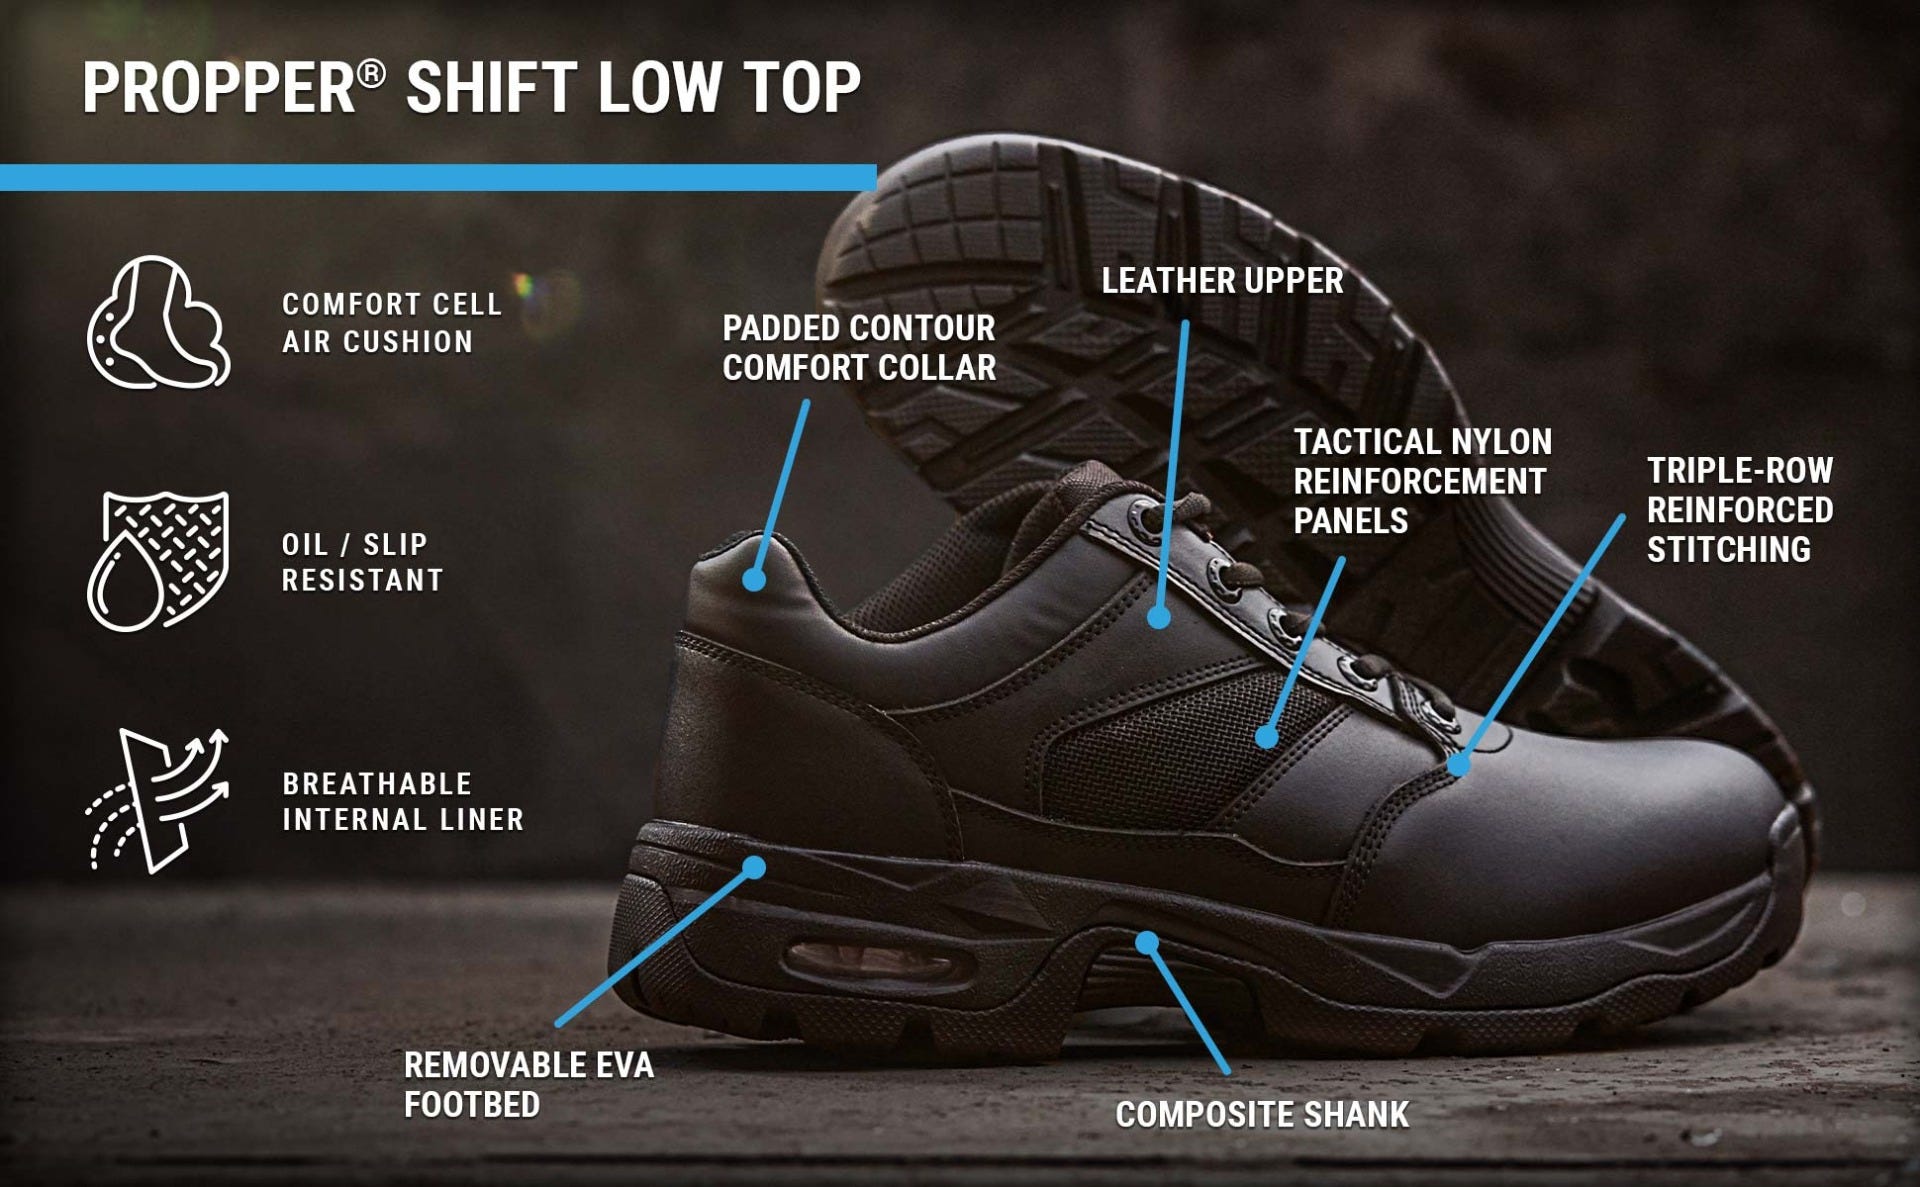 Shift Low Top shoes offer a comfort air cell cushion, removable insert, triple stitching with breathable liner and leather upper.